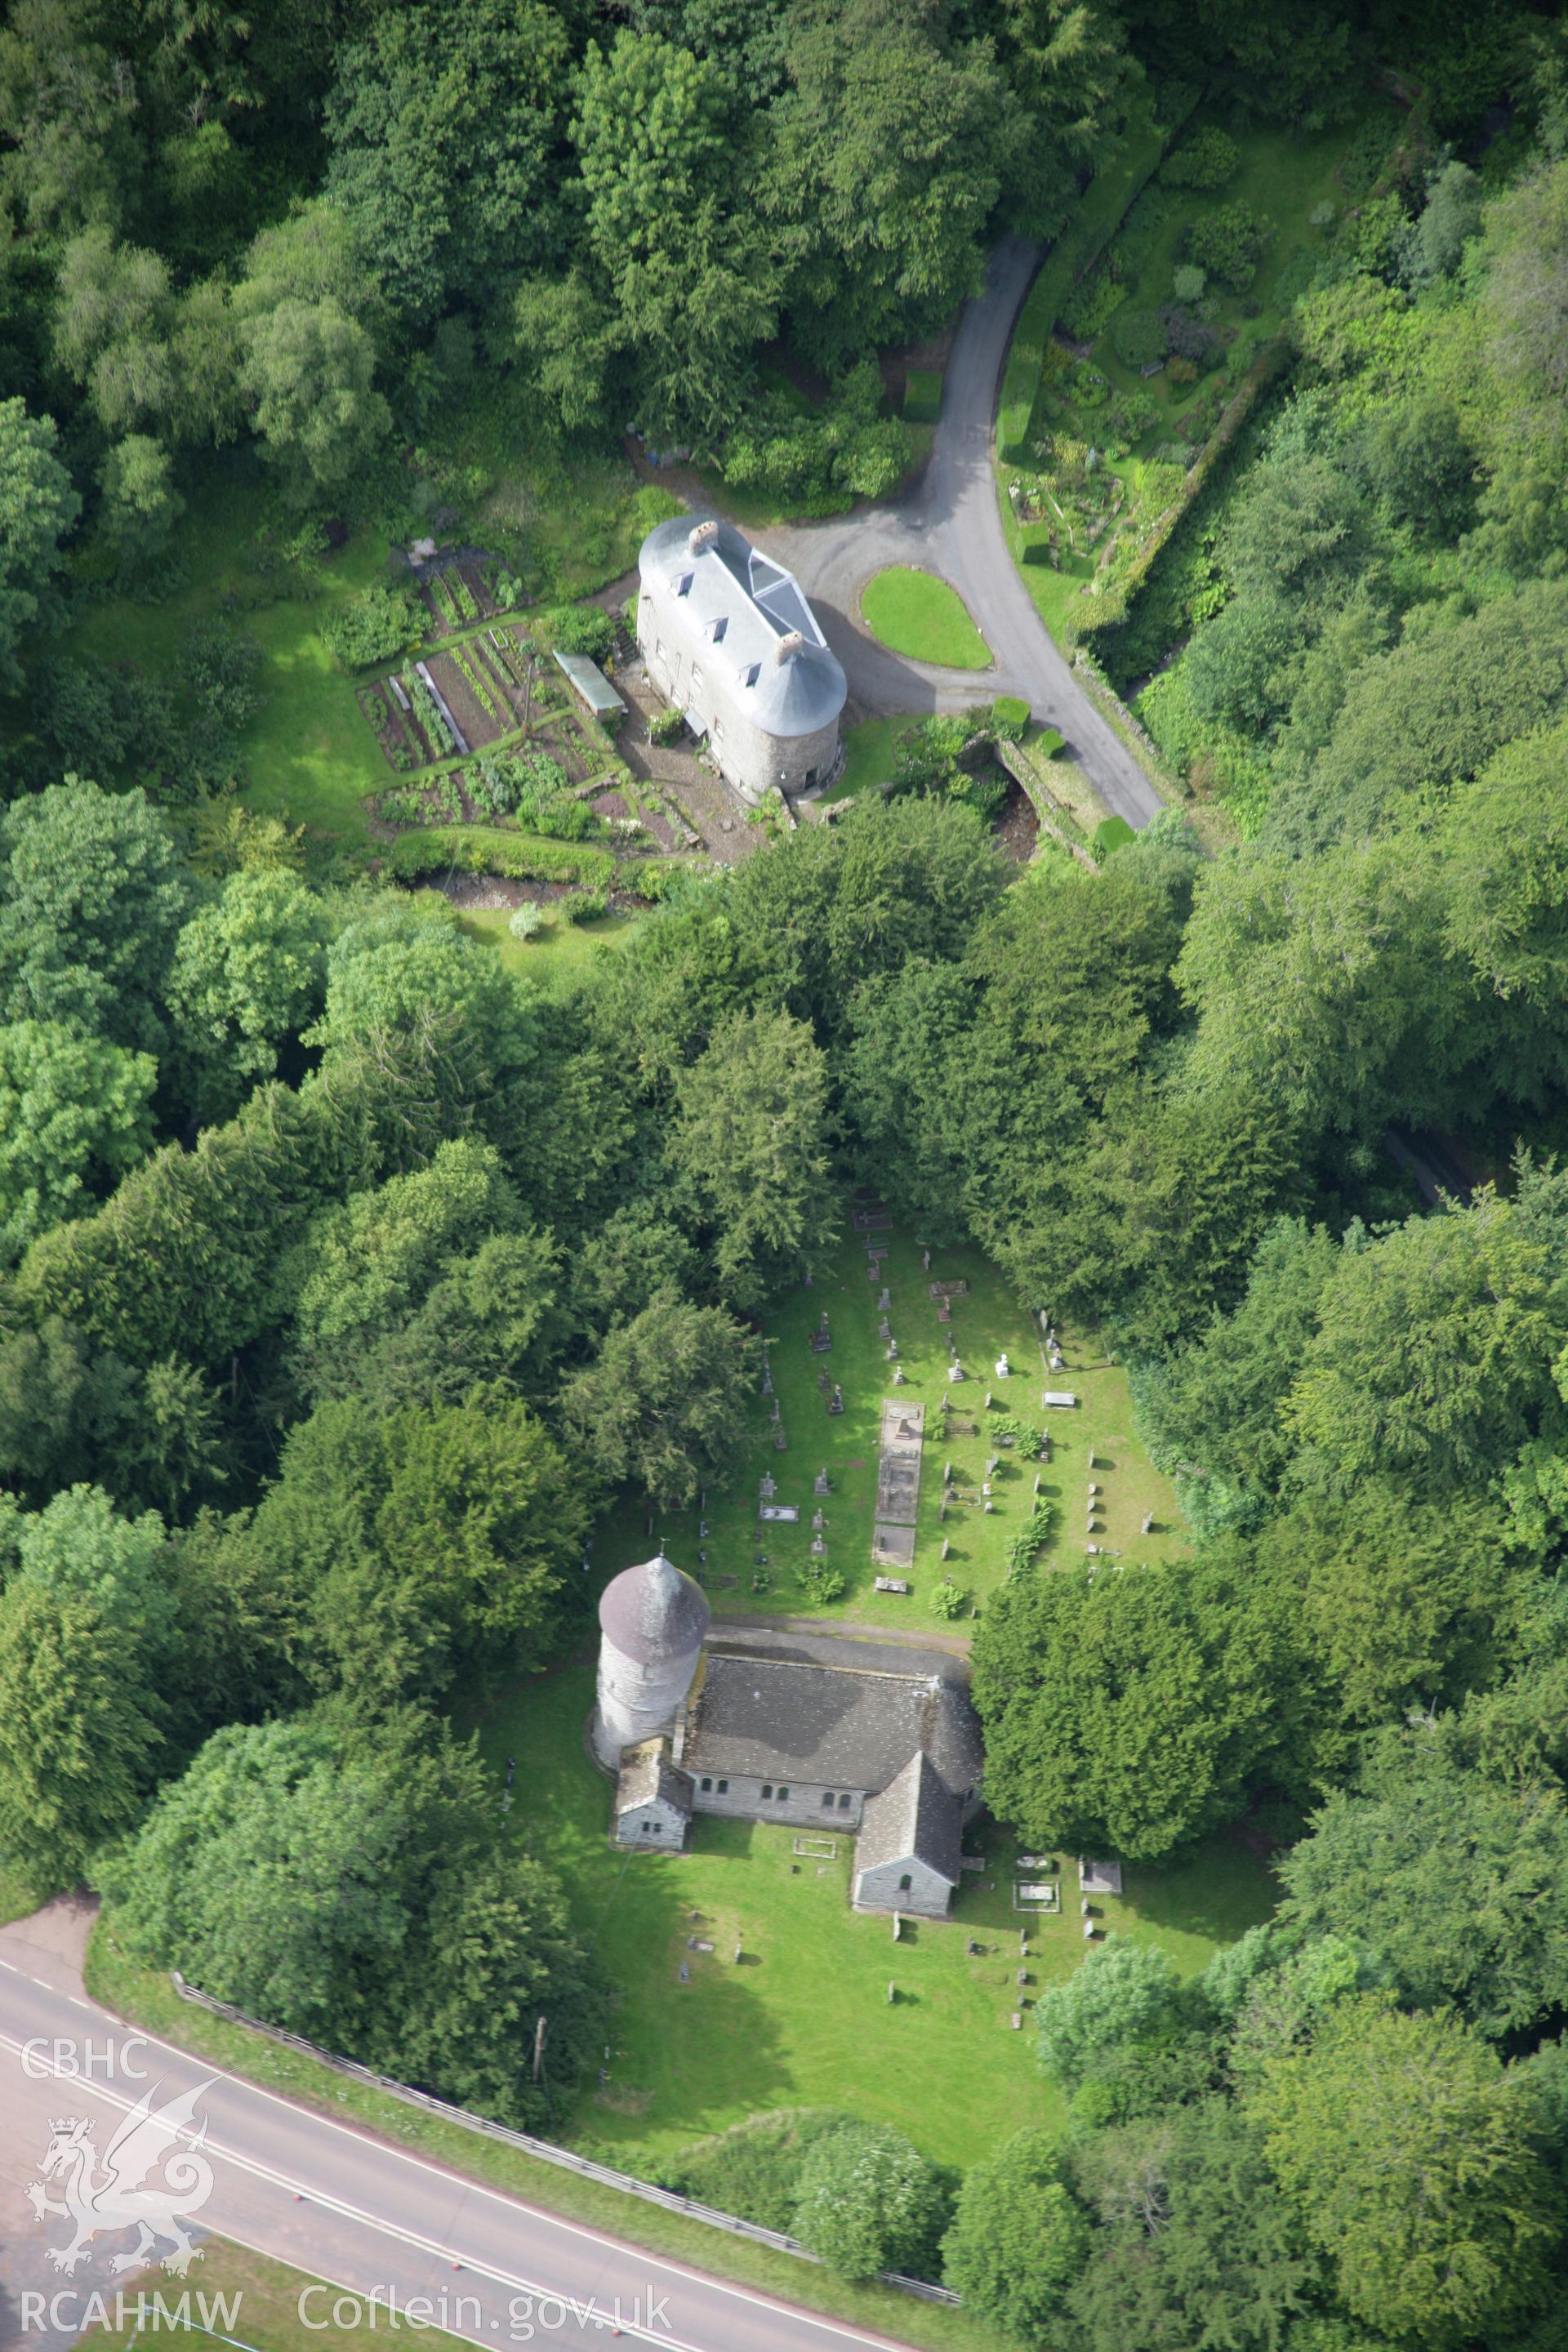 RCAHMW colour oblique aerial photograph of Capel Bettws, Penpont. Taken on 09 July 2007 by Toby Driver